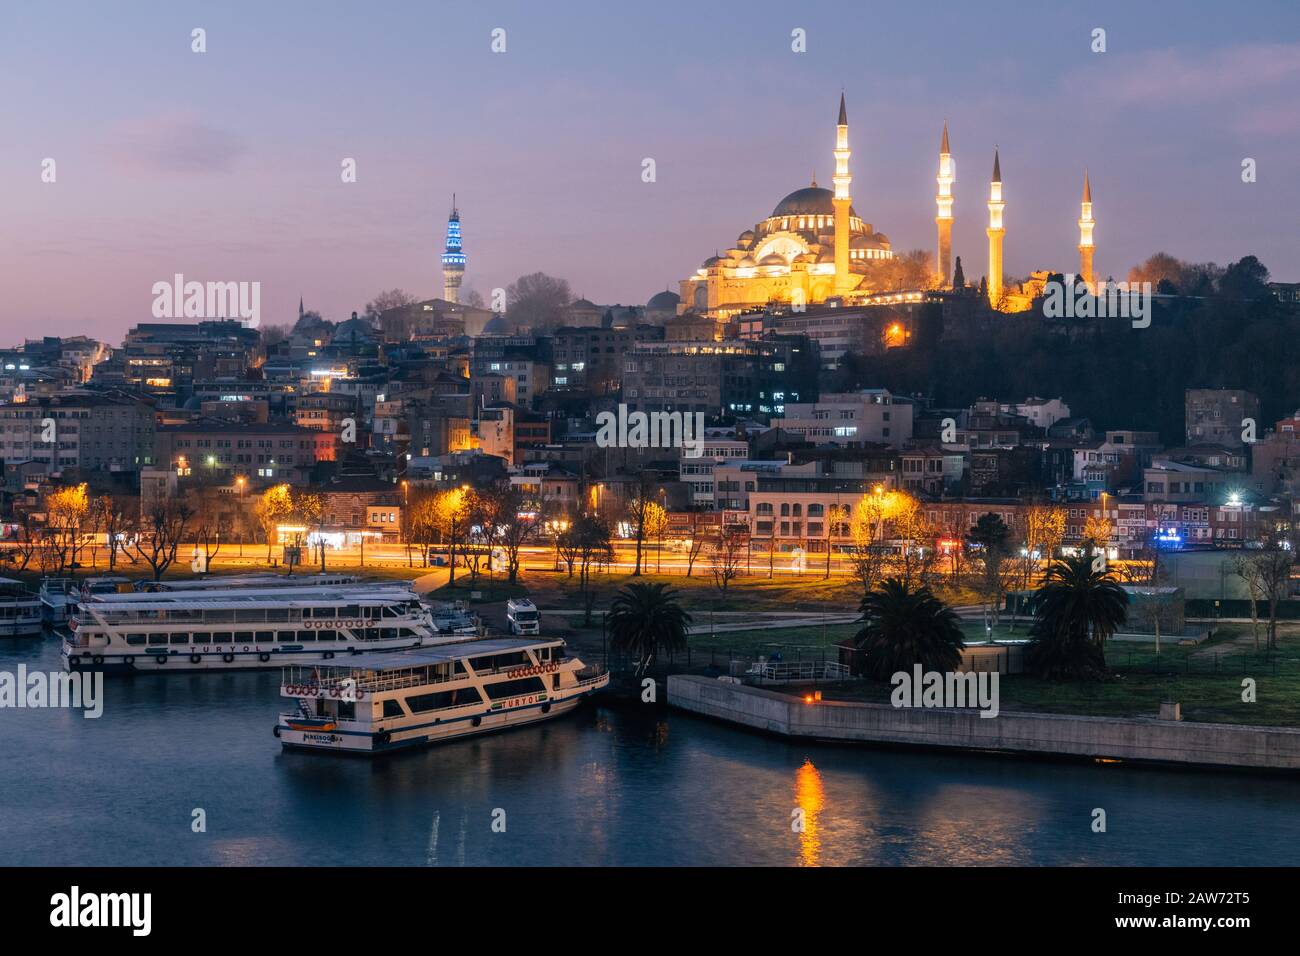 Istanbul, Turkey - Jan 14, 2020: The Suleymaniye Mosque is an Ottoman imperial mosque located on the Third Hill of Istanbul, Turkey Stock Photo